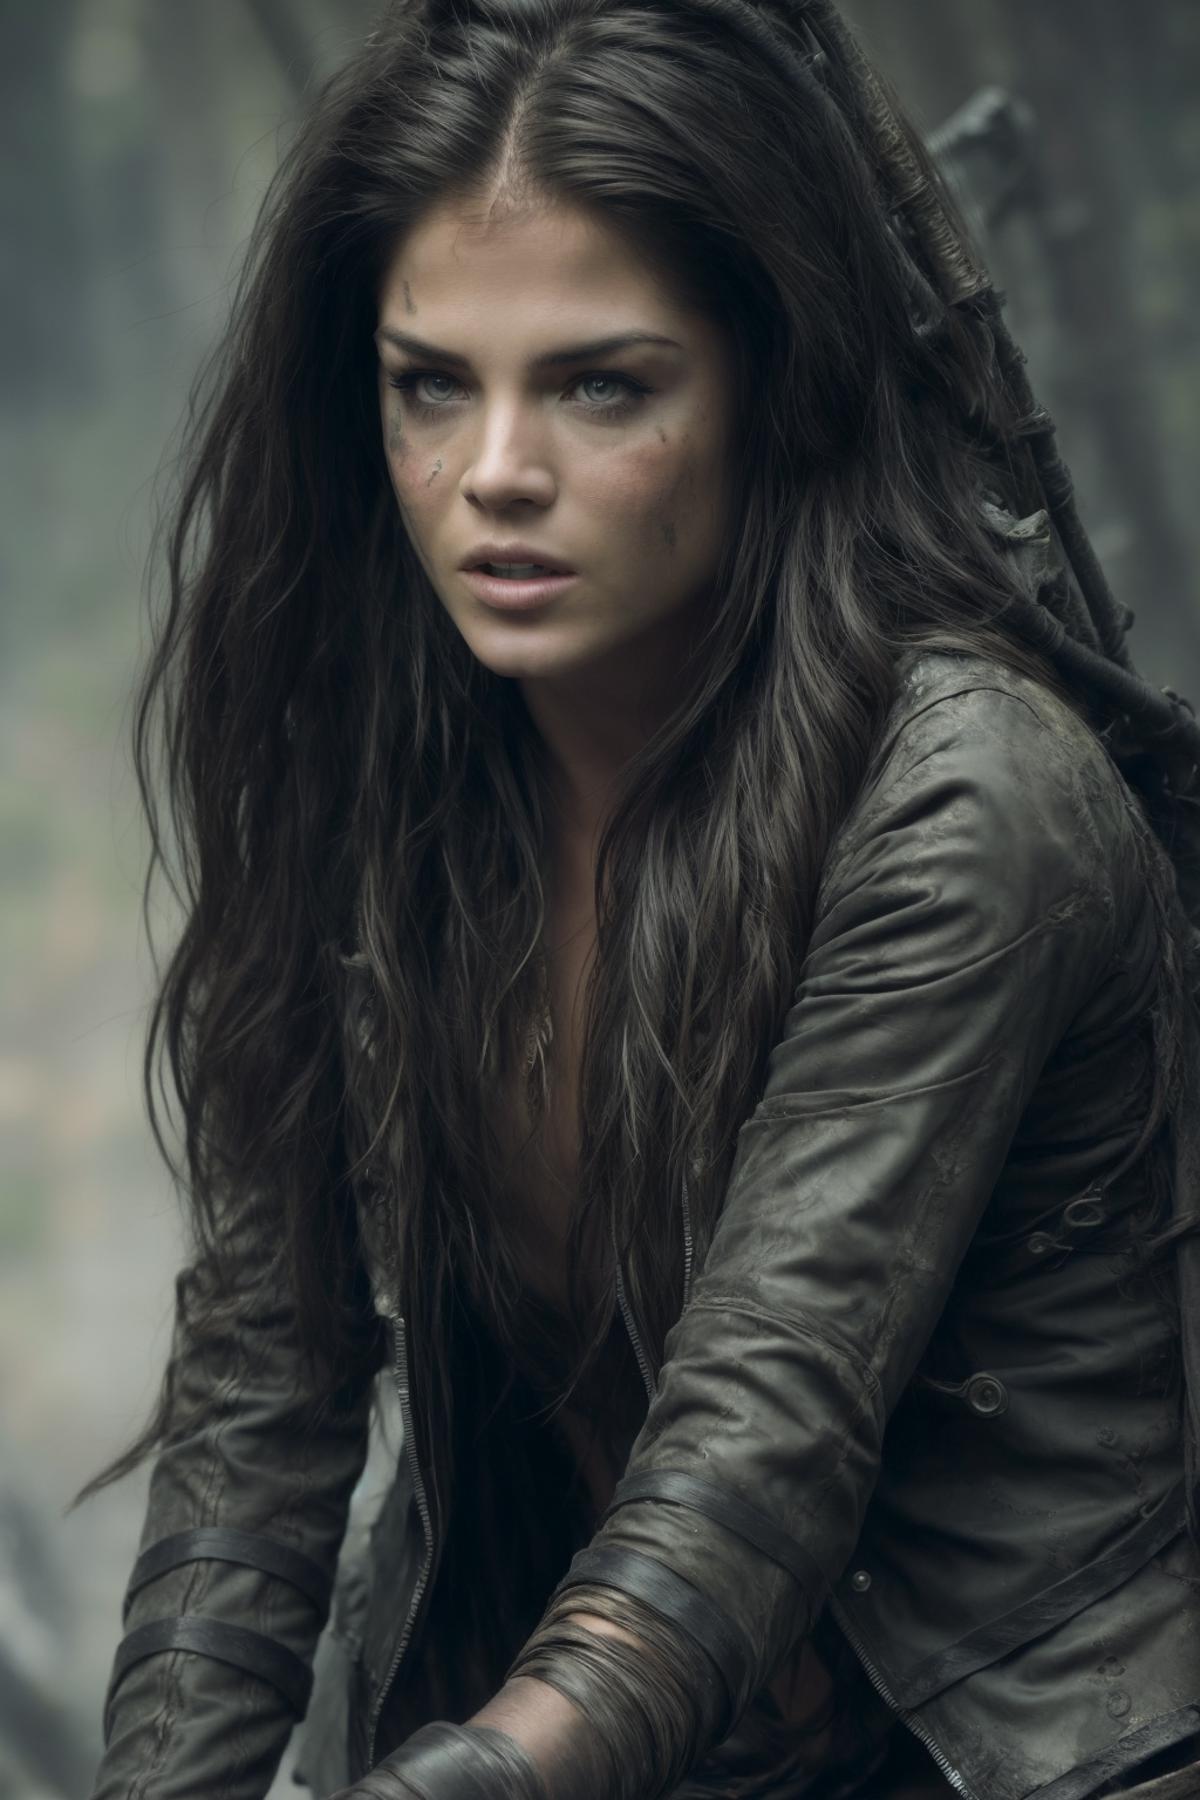 Marie Avgeropoulos image by FoxyLoxyMoxy